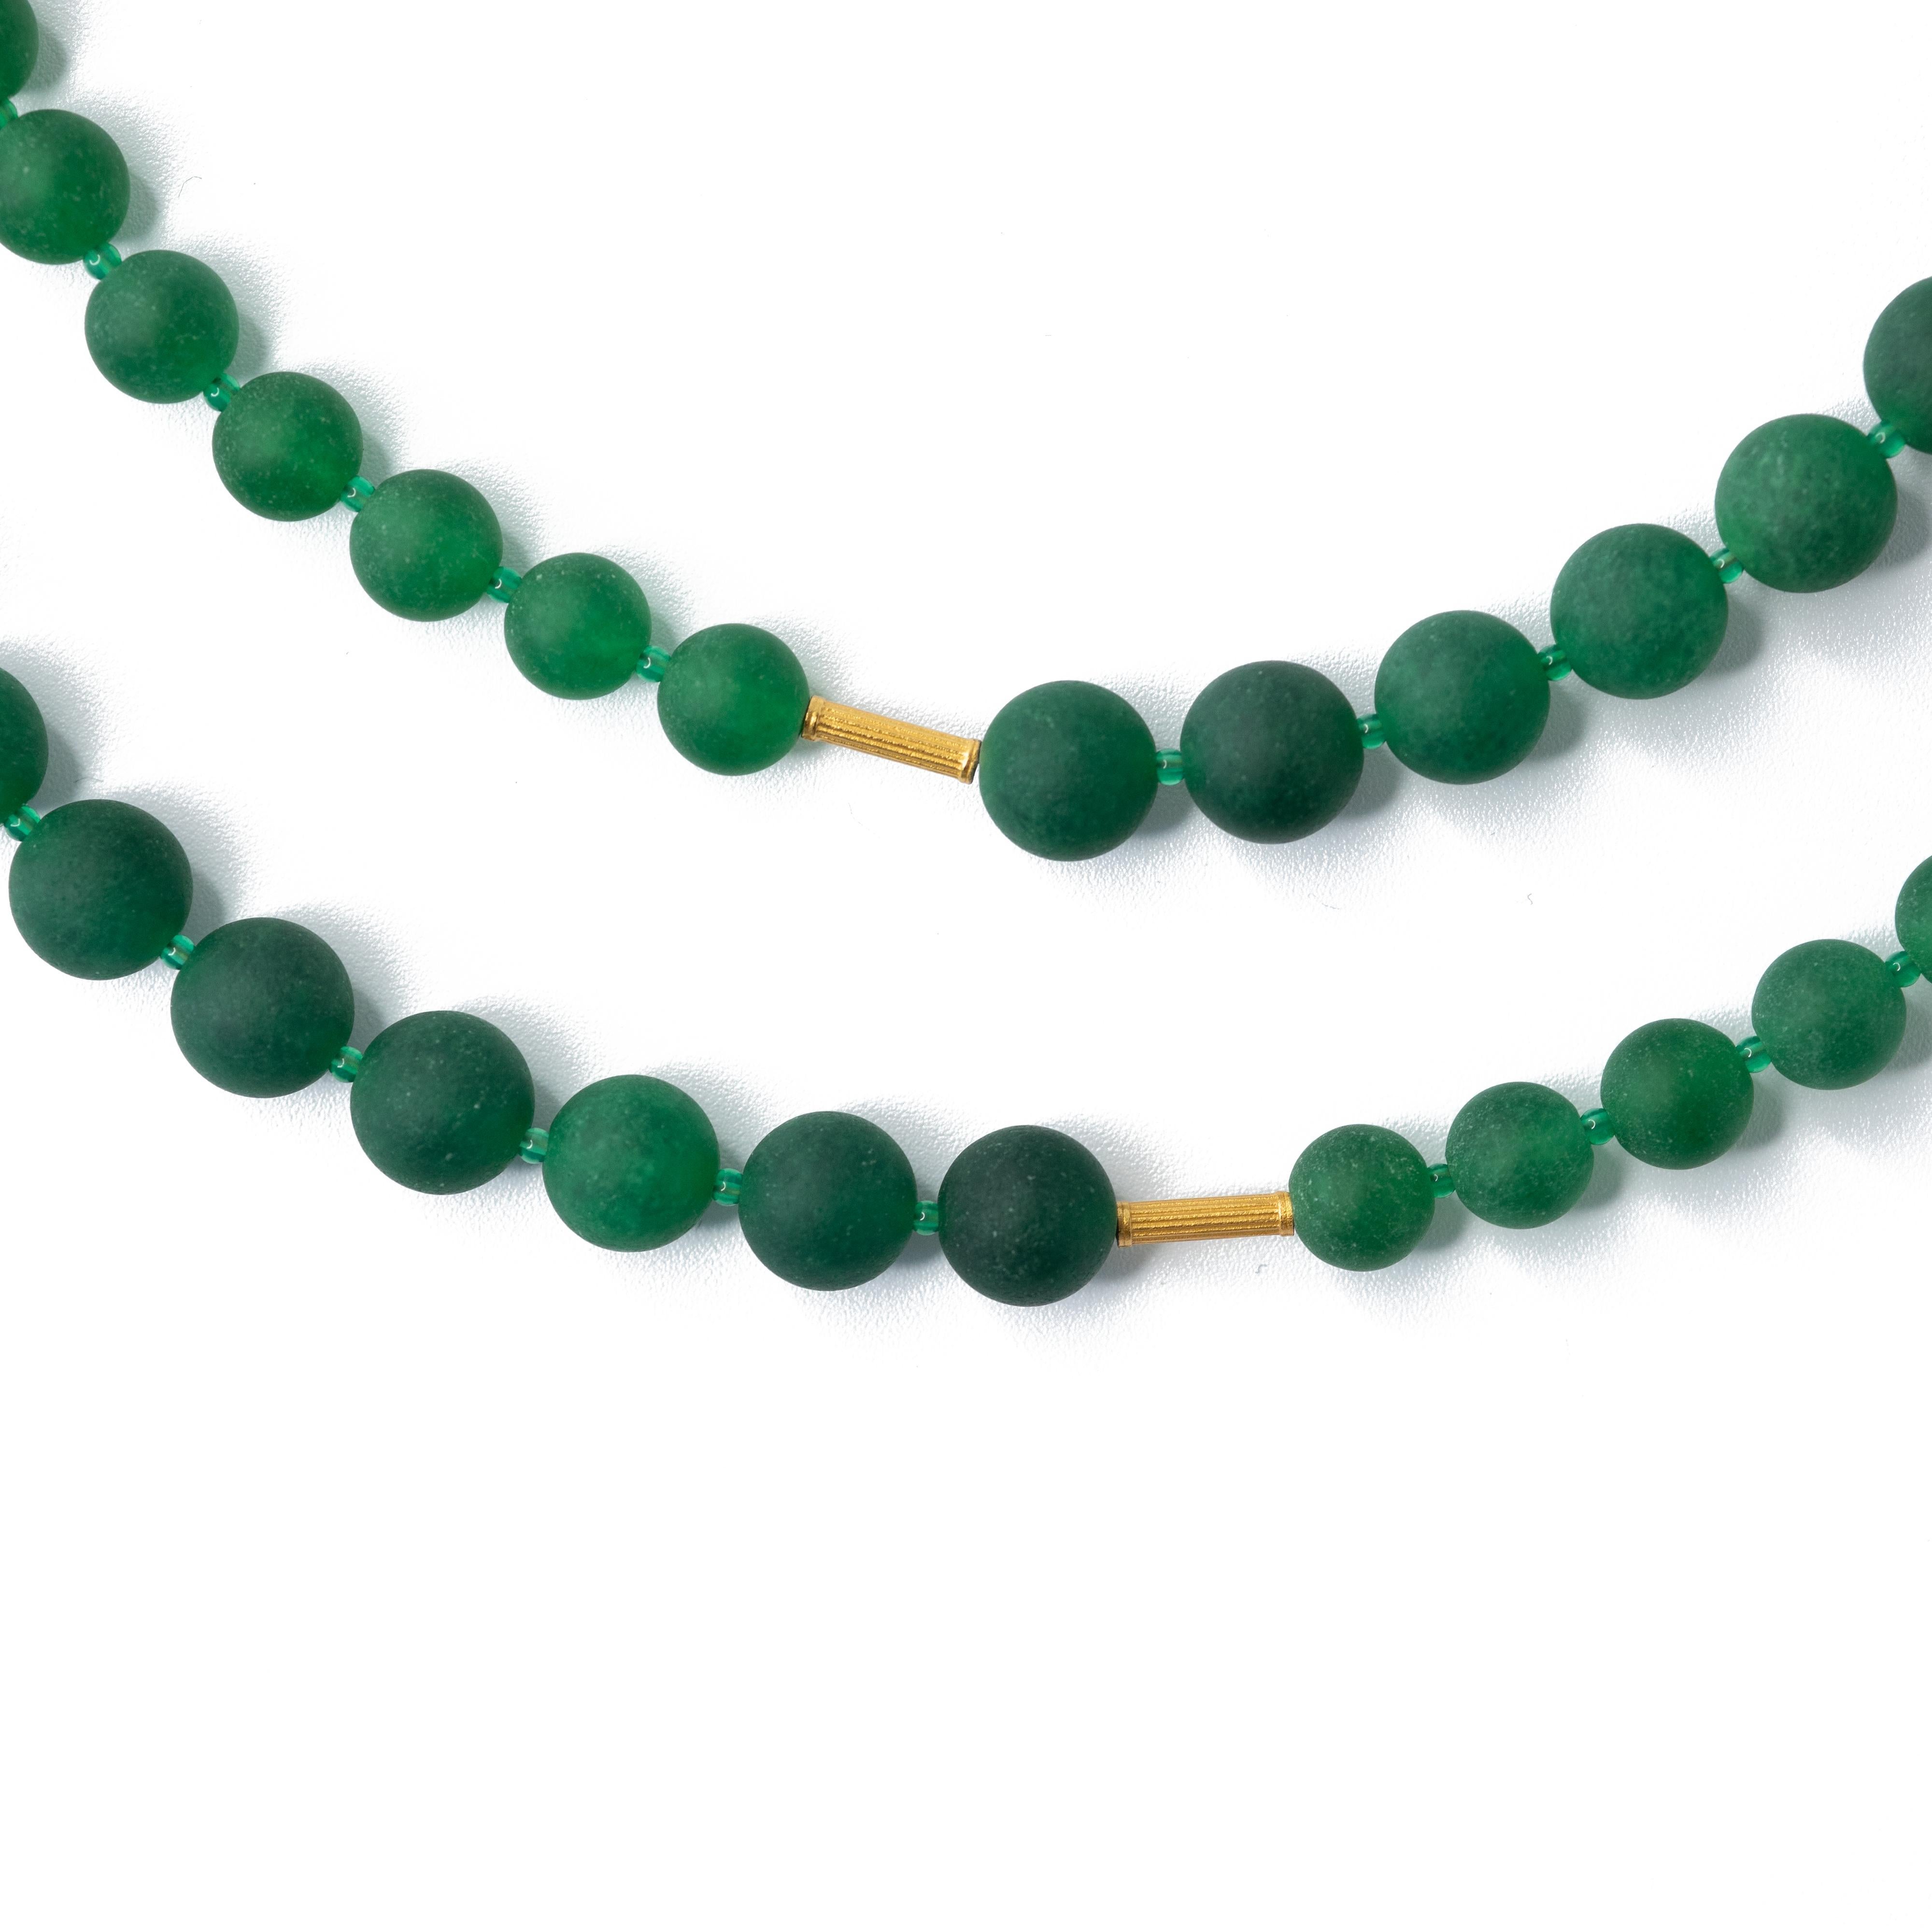 Green Chalcedony Beads and Gold Necklace -The Poet's Garden by Bombyx House In New Condition For Sale In Westport, CT